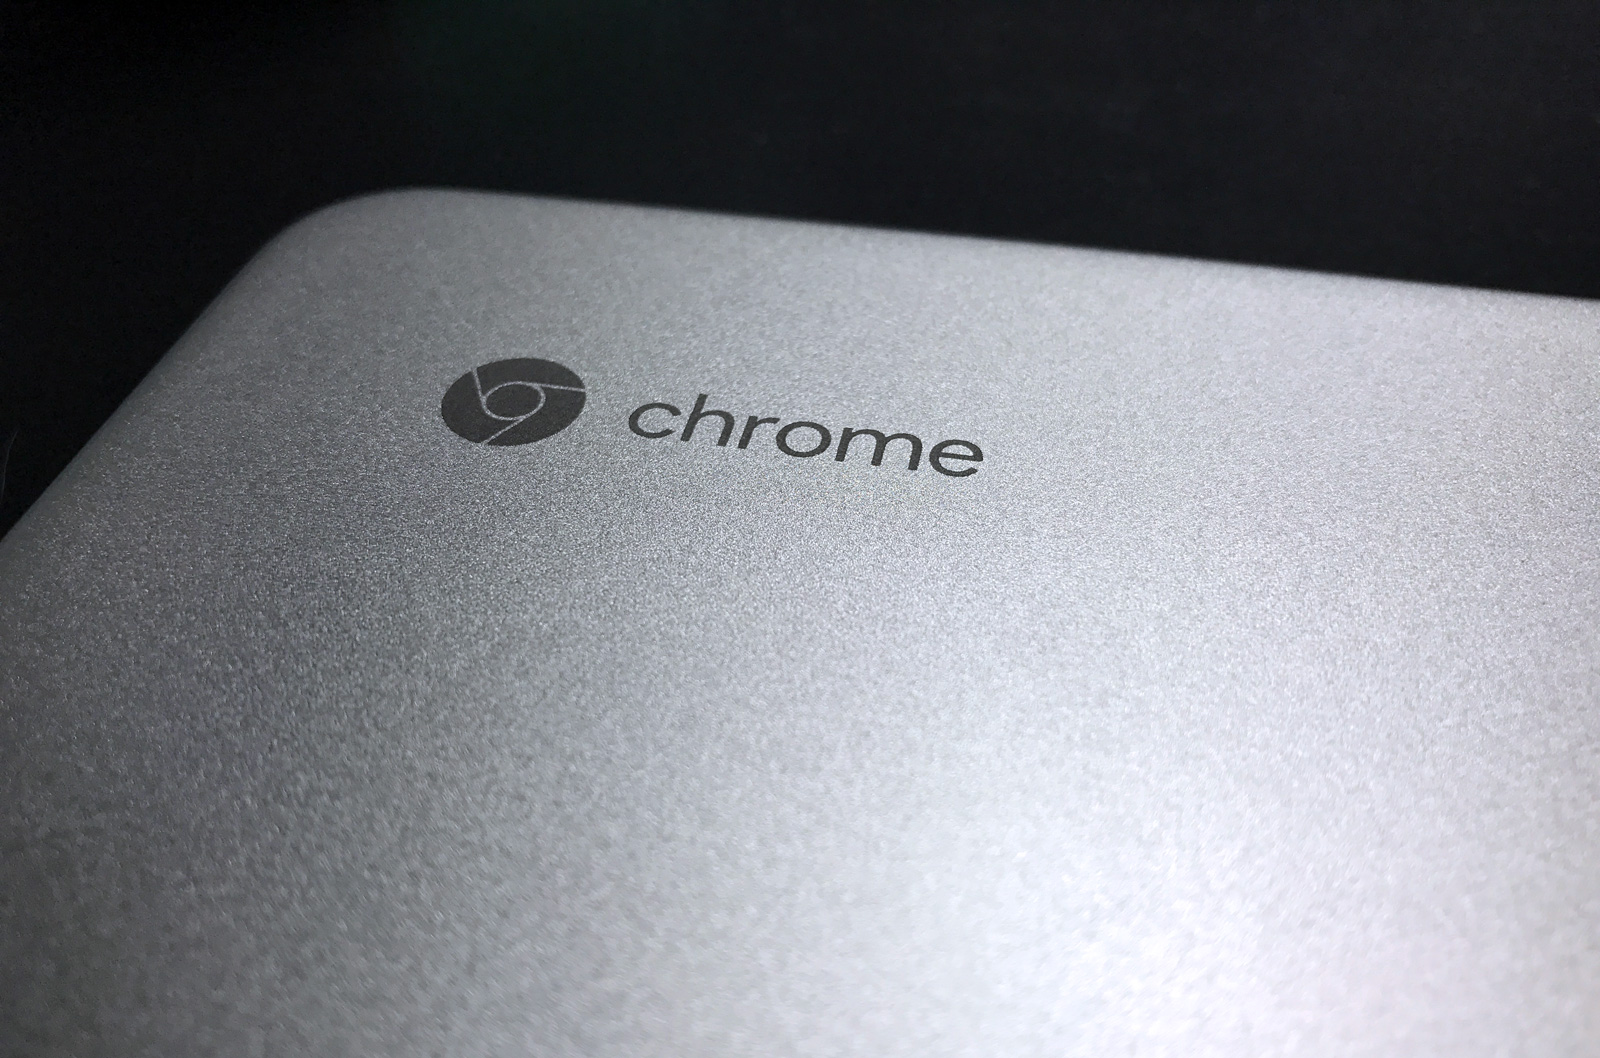 Google wants to encourage more premium Chromebooks with ‘X’ brand, but should it?